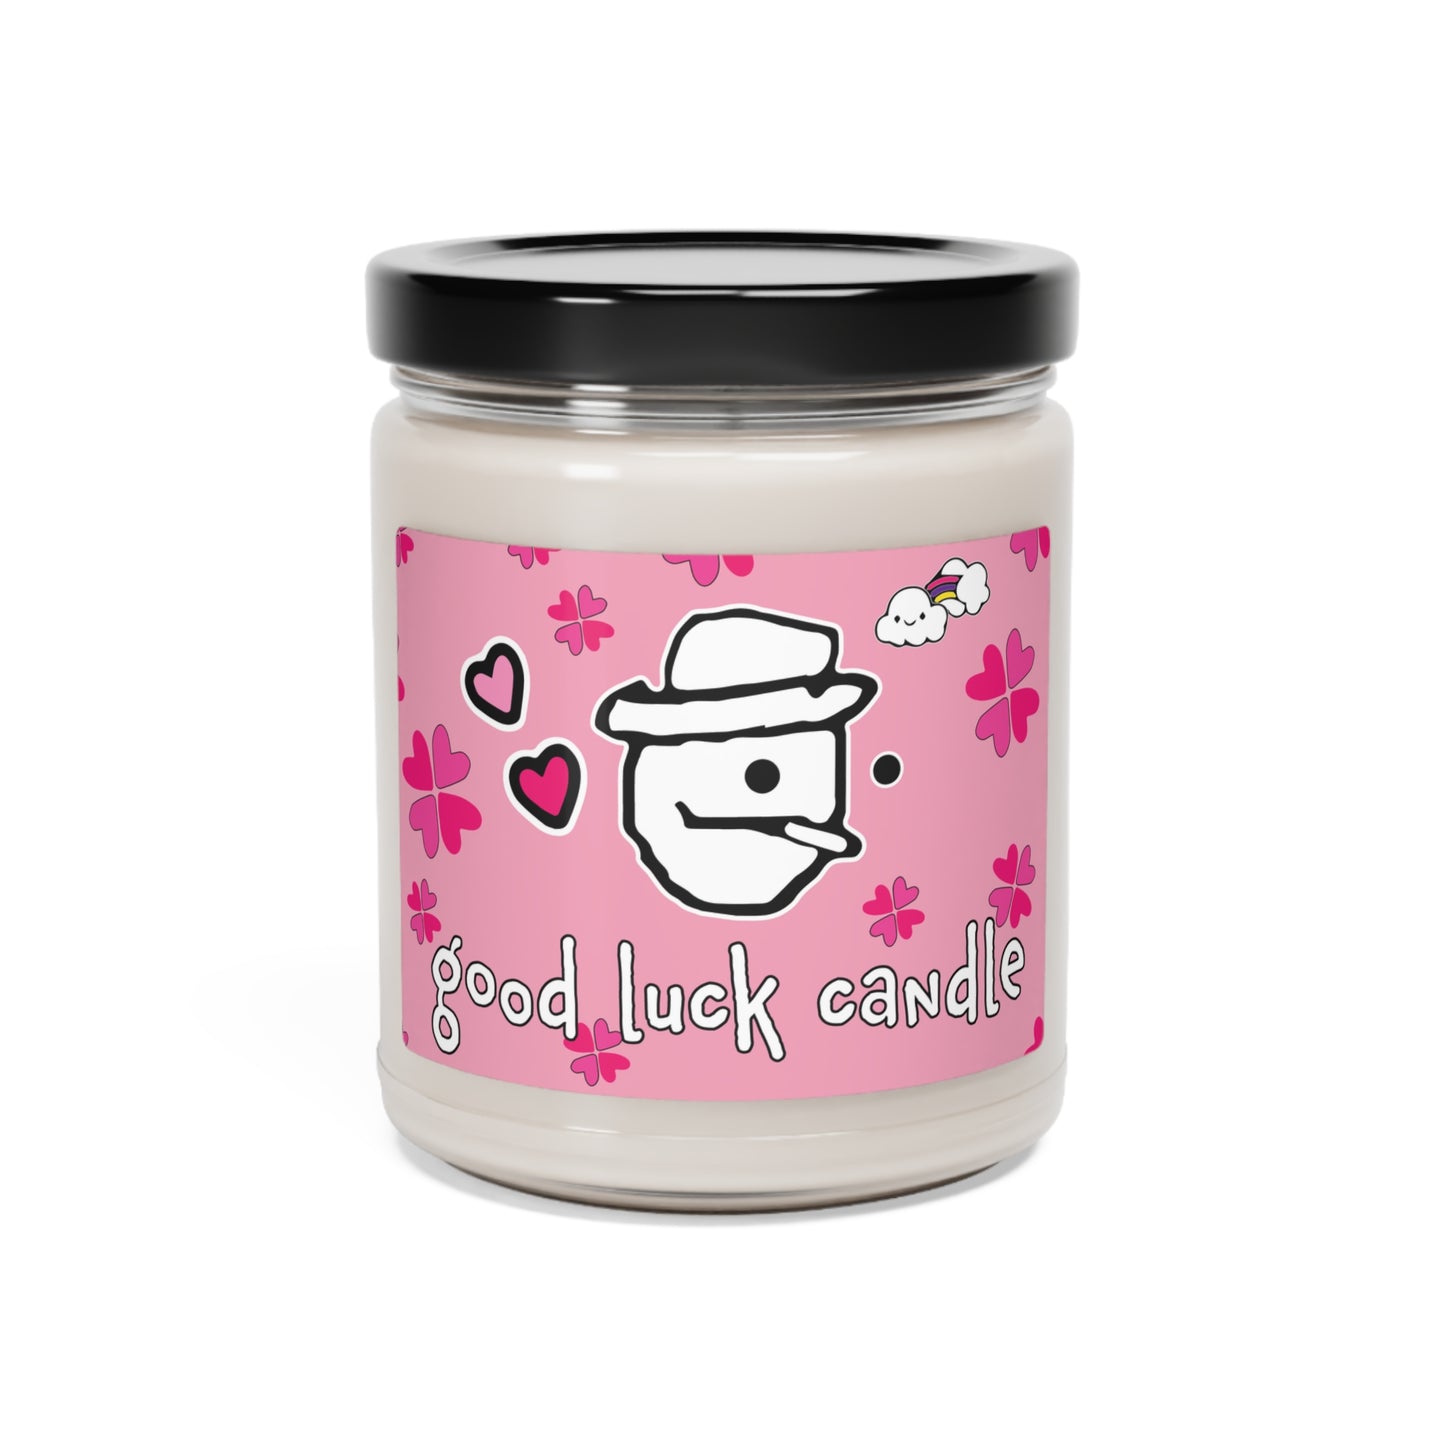 g4g lucky candle